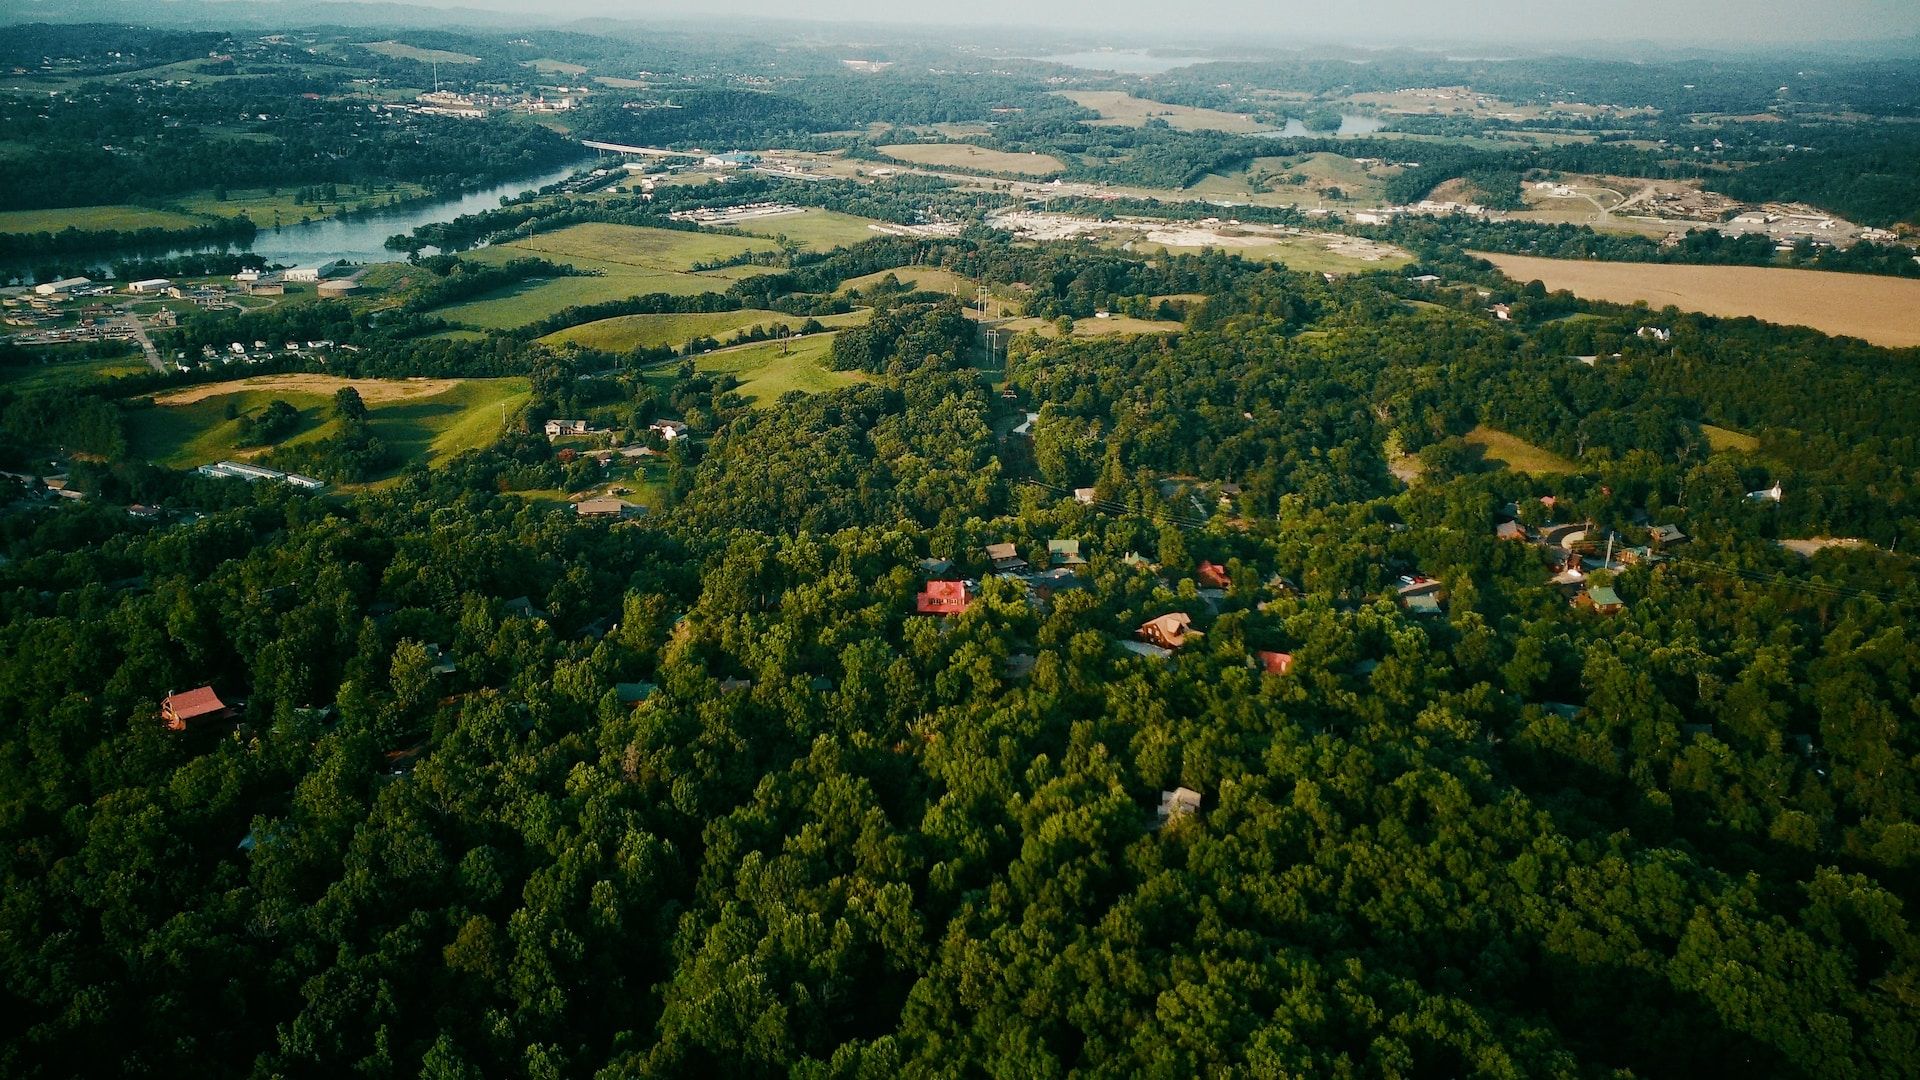 Aerial view of buildings and lush forest in Pigeon Forge, TN, USA